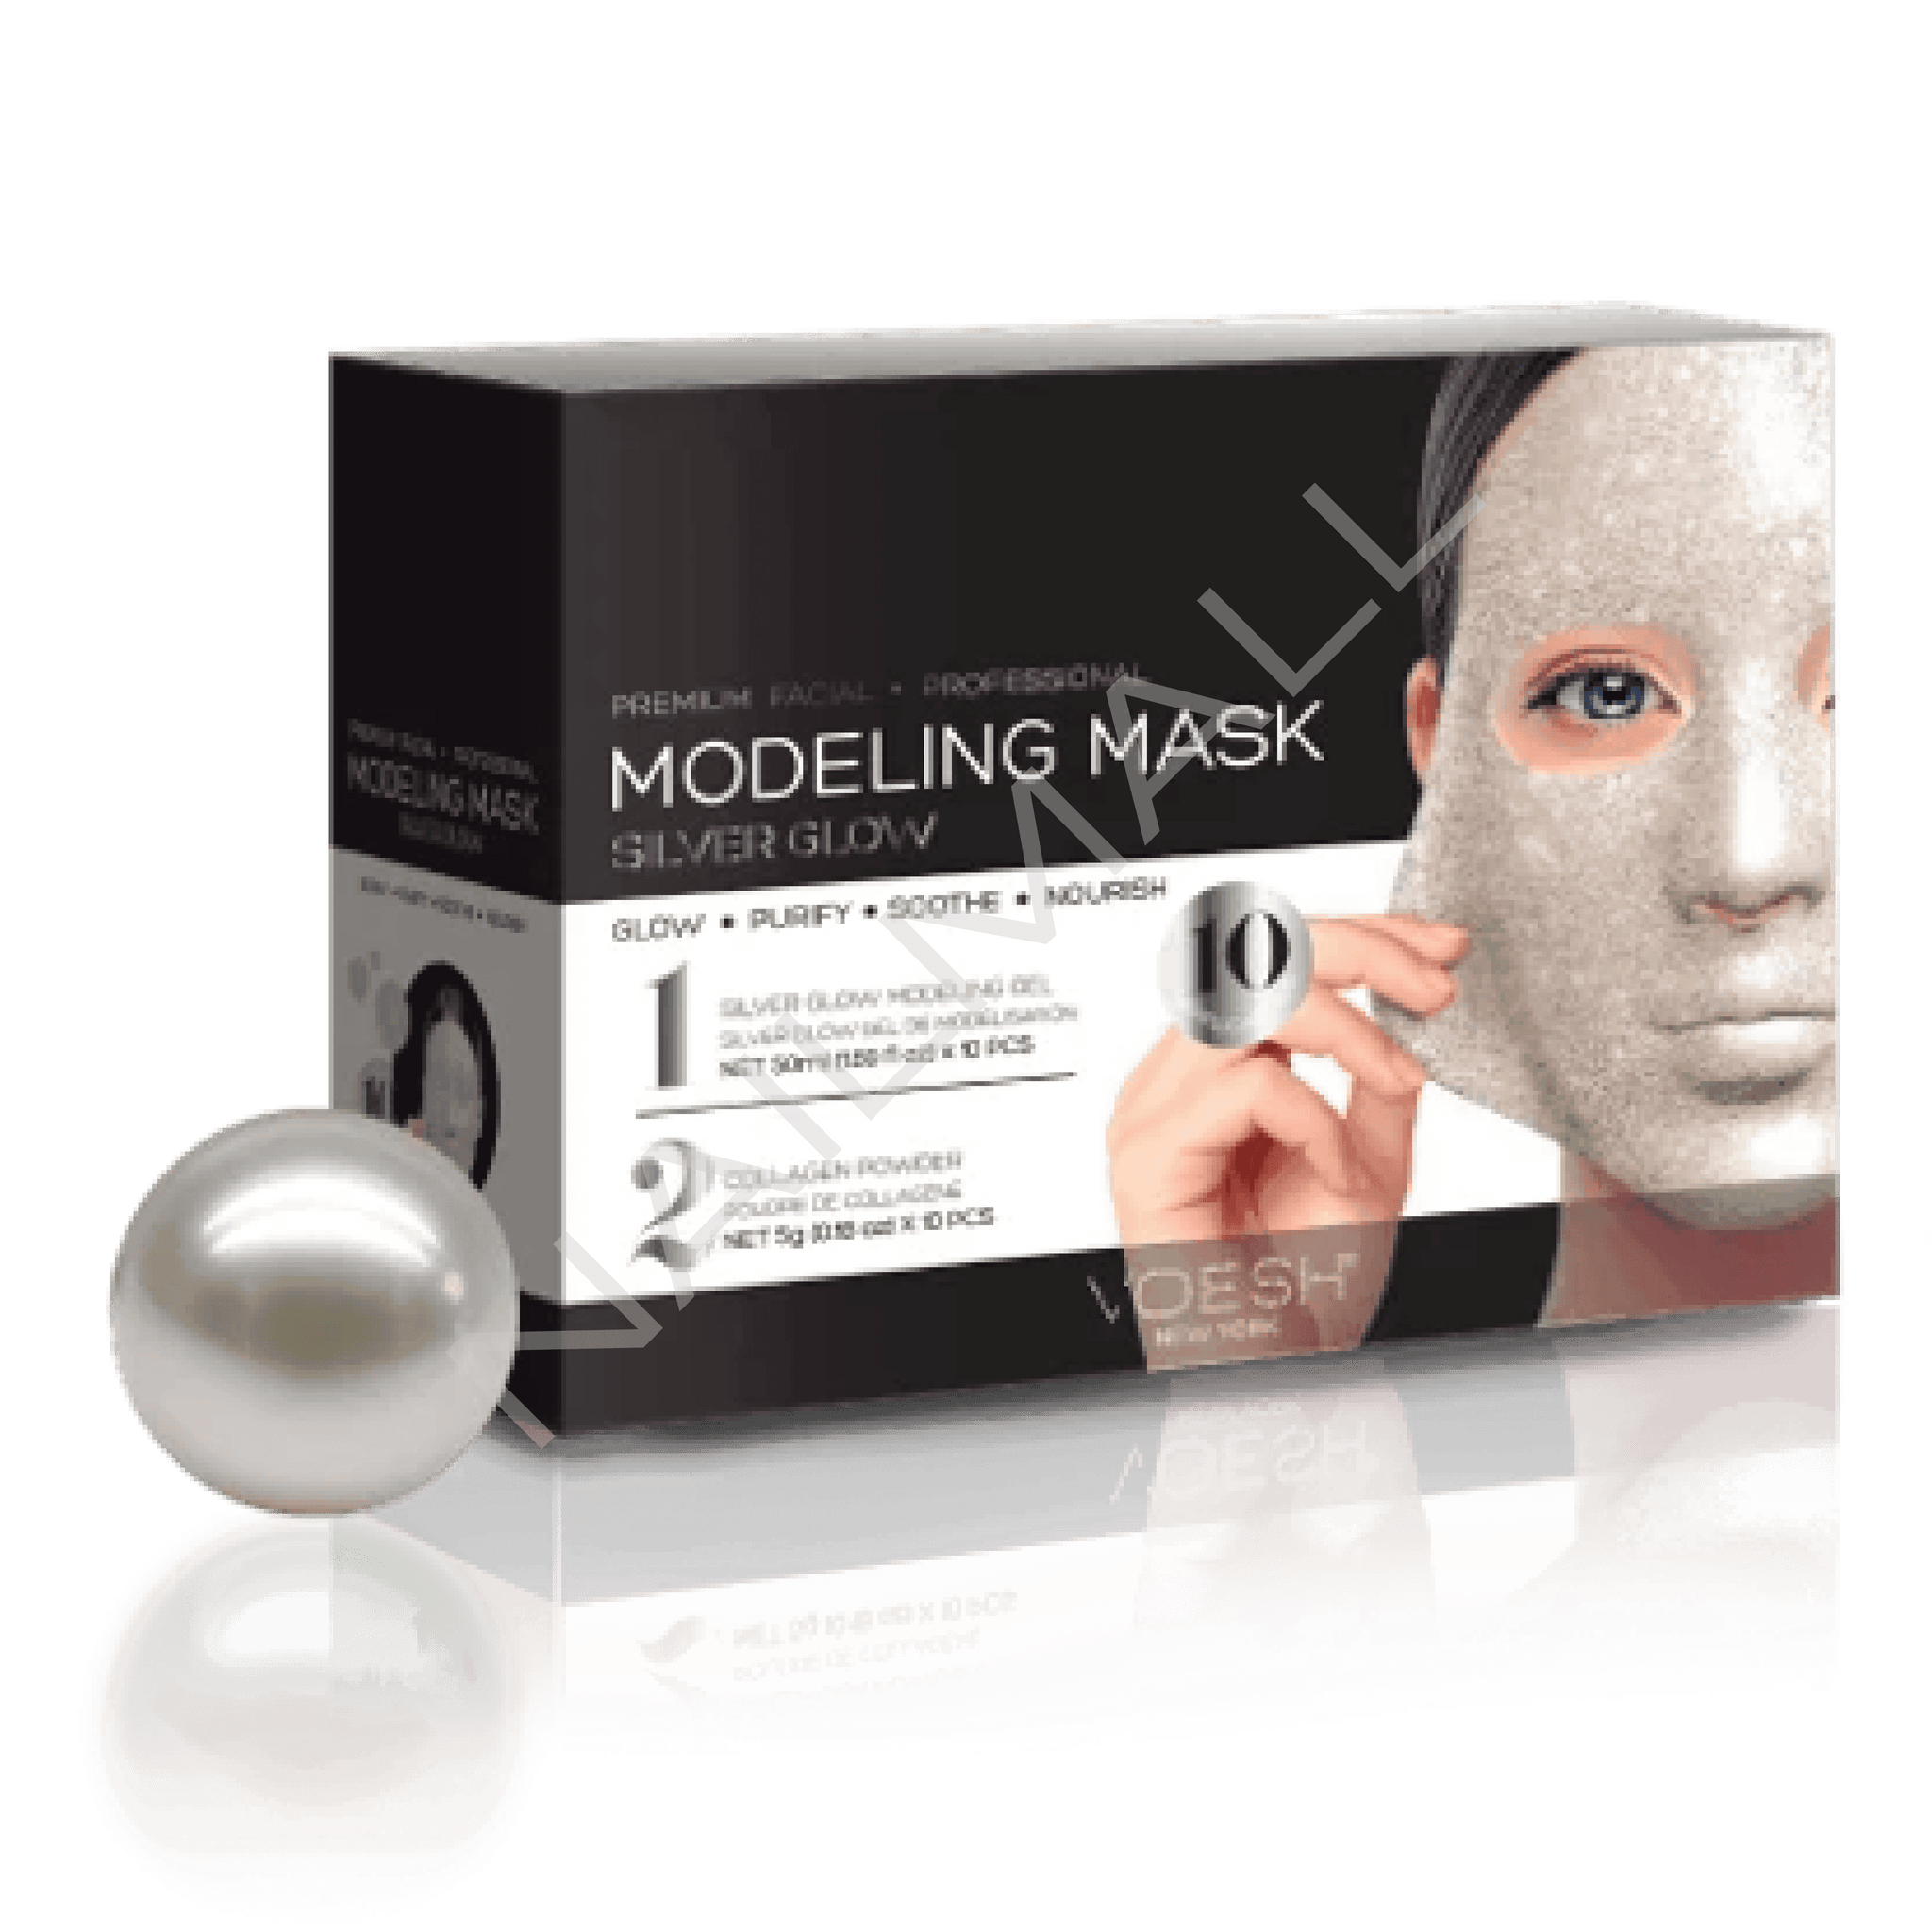 VOESH Modeling Mask - Silver Glow 10pc